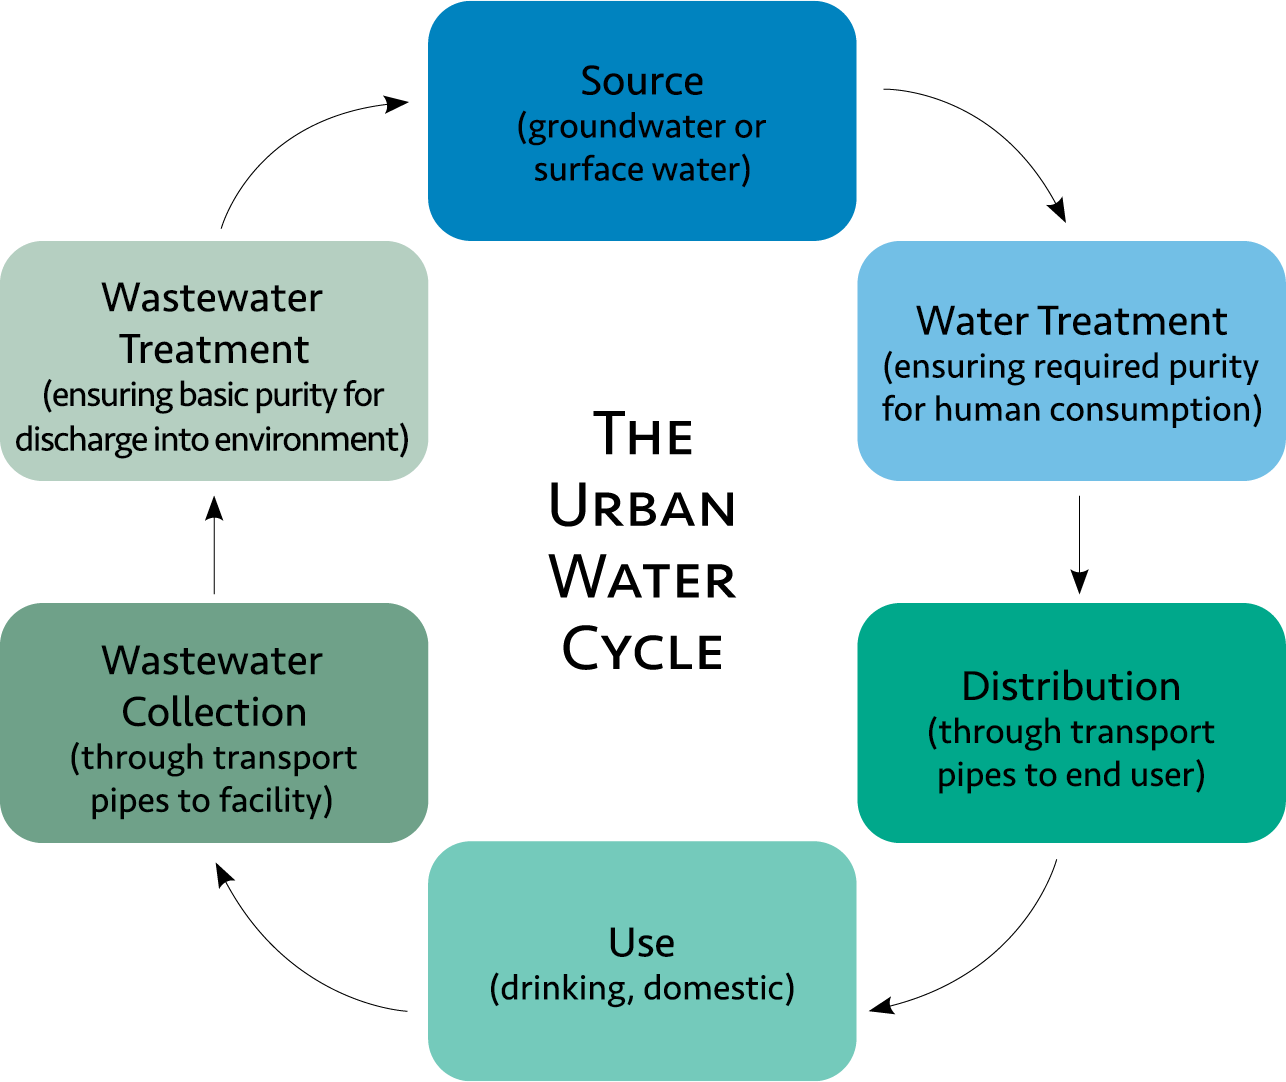 Flow chart showing the urban water cycle. The cycle goes: Source (groundwater or surface water), water treatment (ensuring required purity for human consumption), distribution (through transport pipes to end user), use (drinking, domestic), wastewater collection (through transport pipes to facility), wastewater treatment (ensuring basic purity for discharge into environment), and repeat.